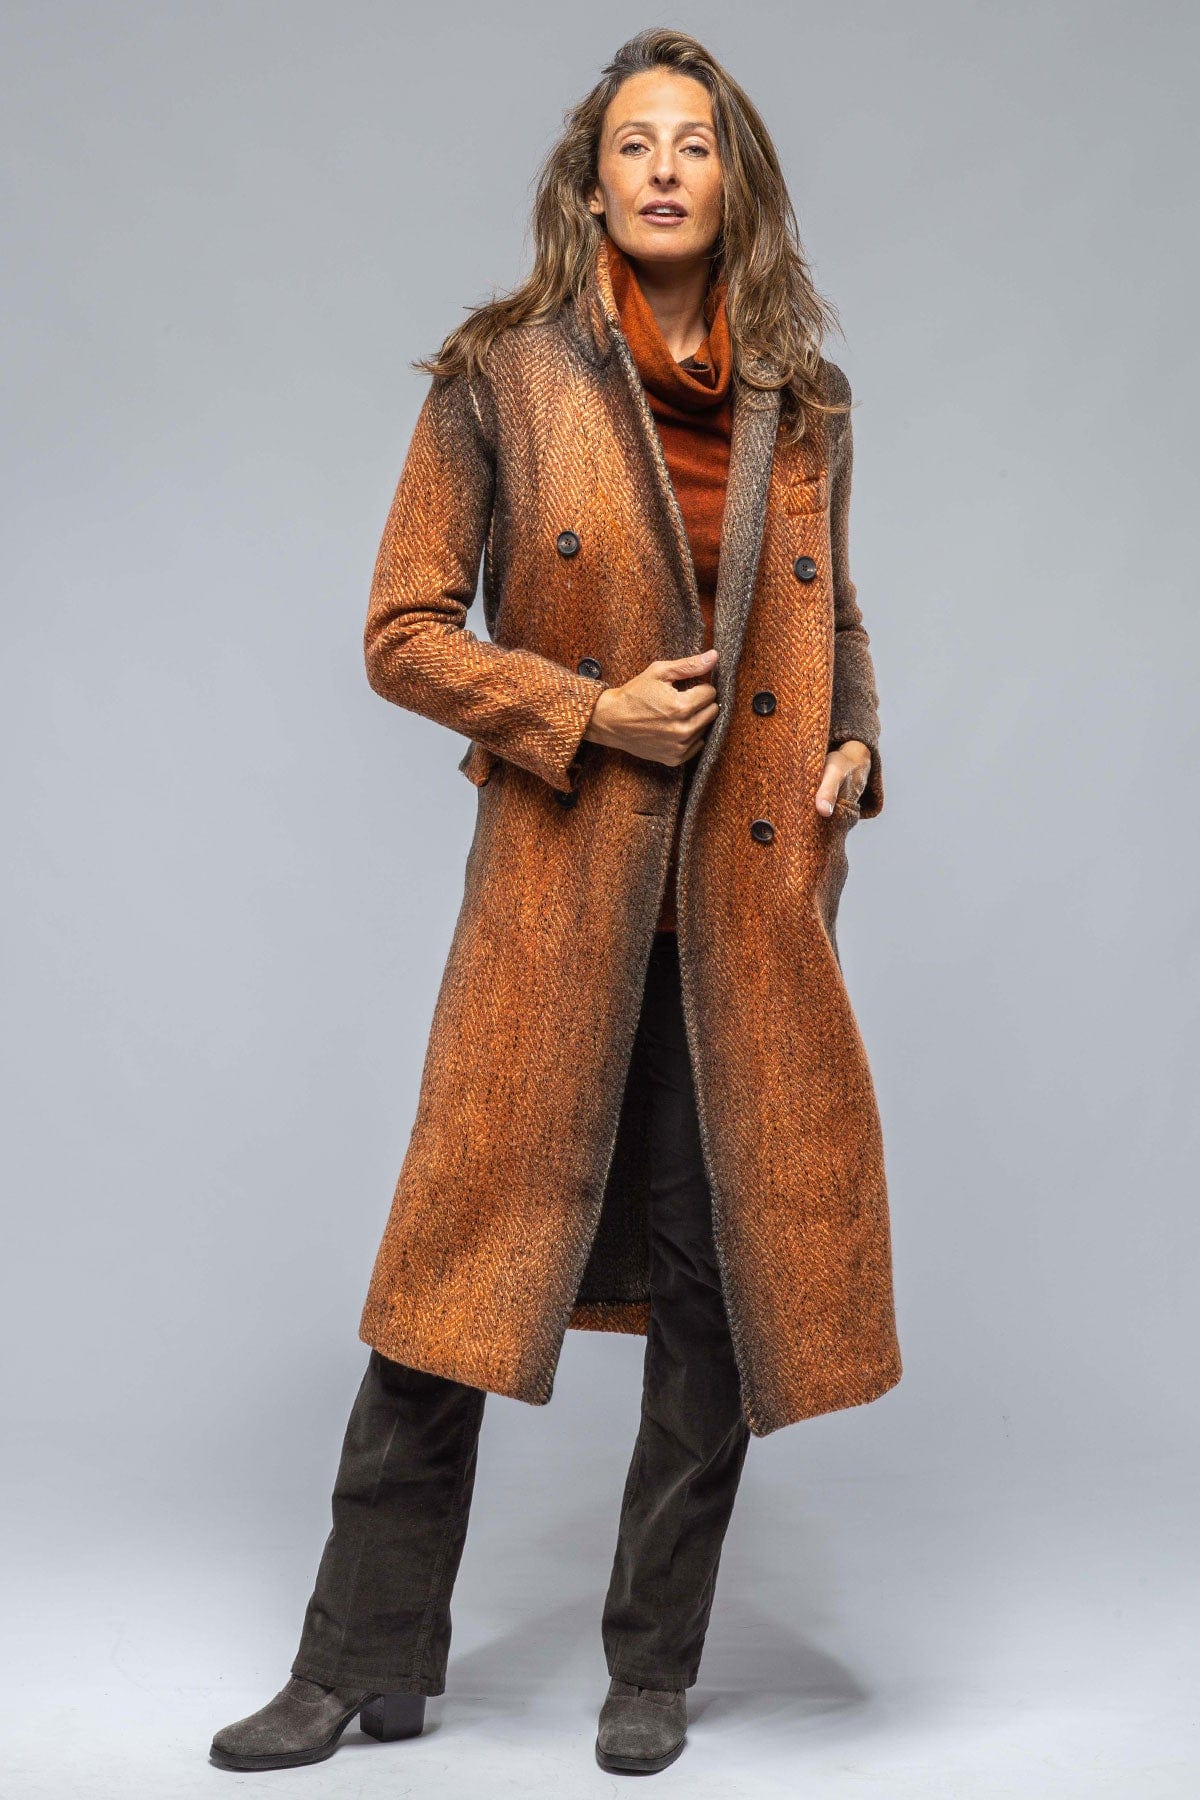 Camilla Long Dbl Brstd Coat In Rust/Charcoal - AXEL'S